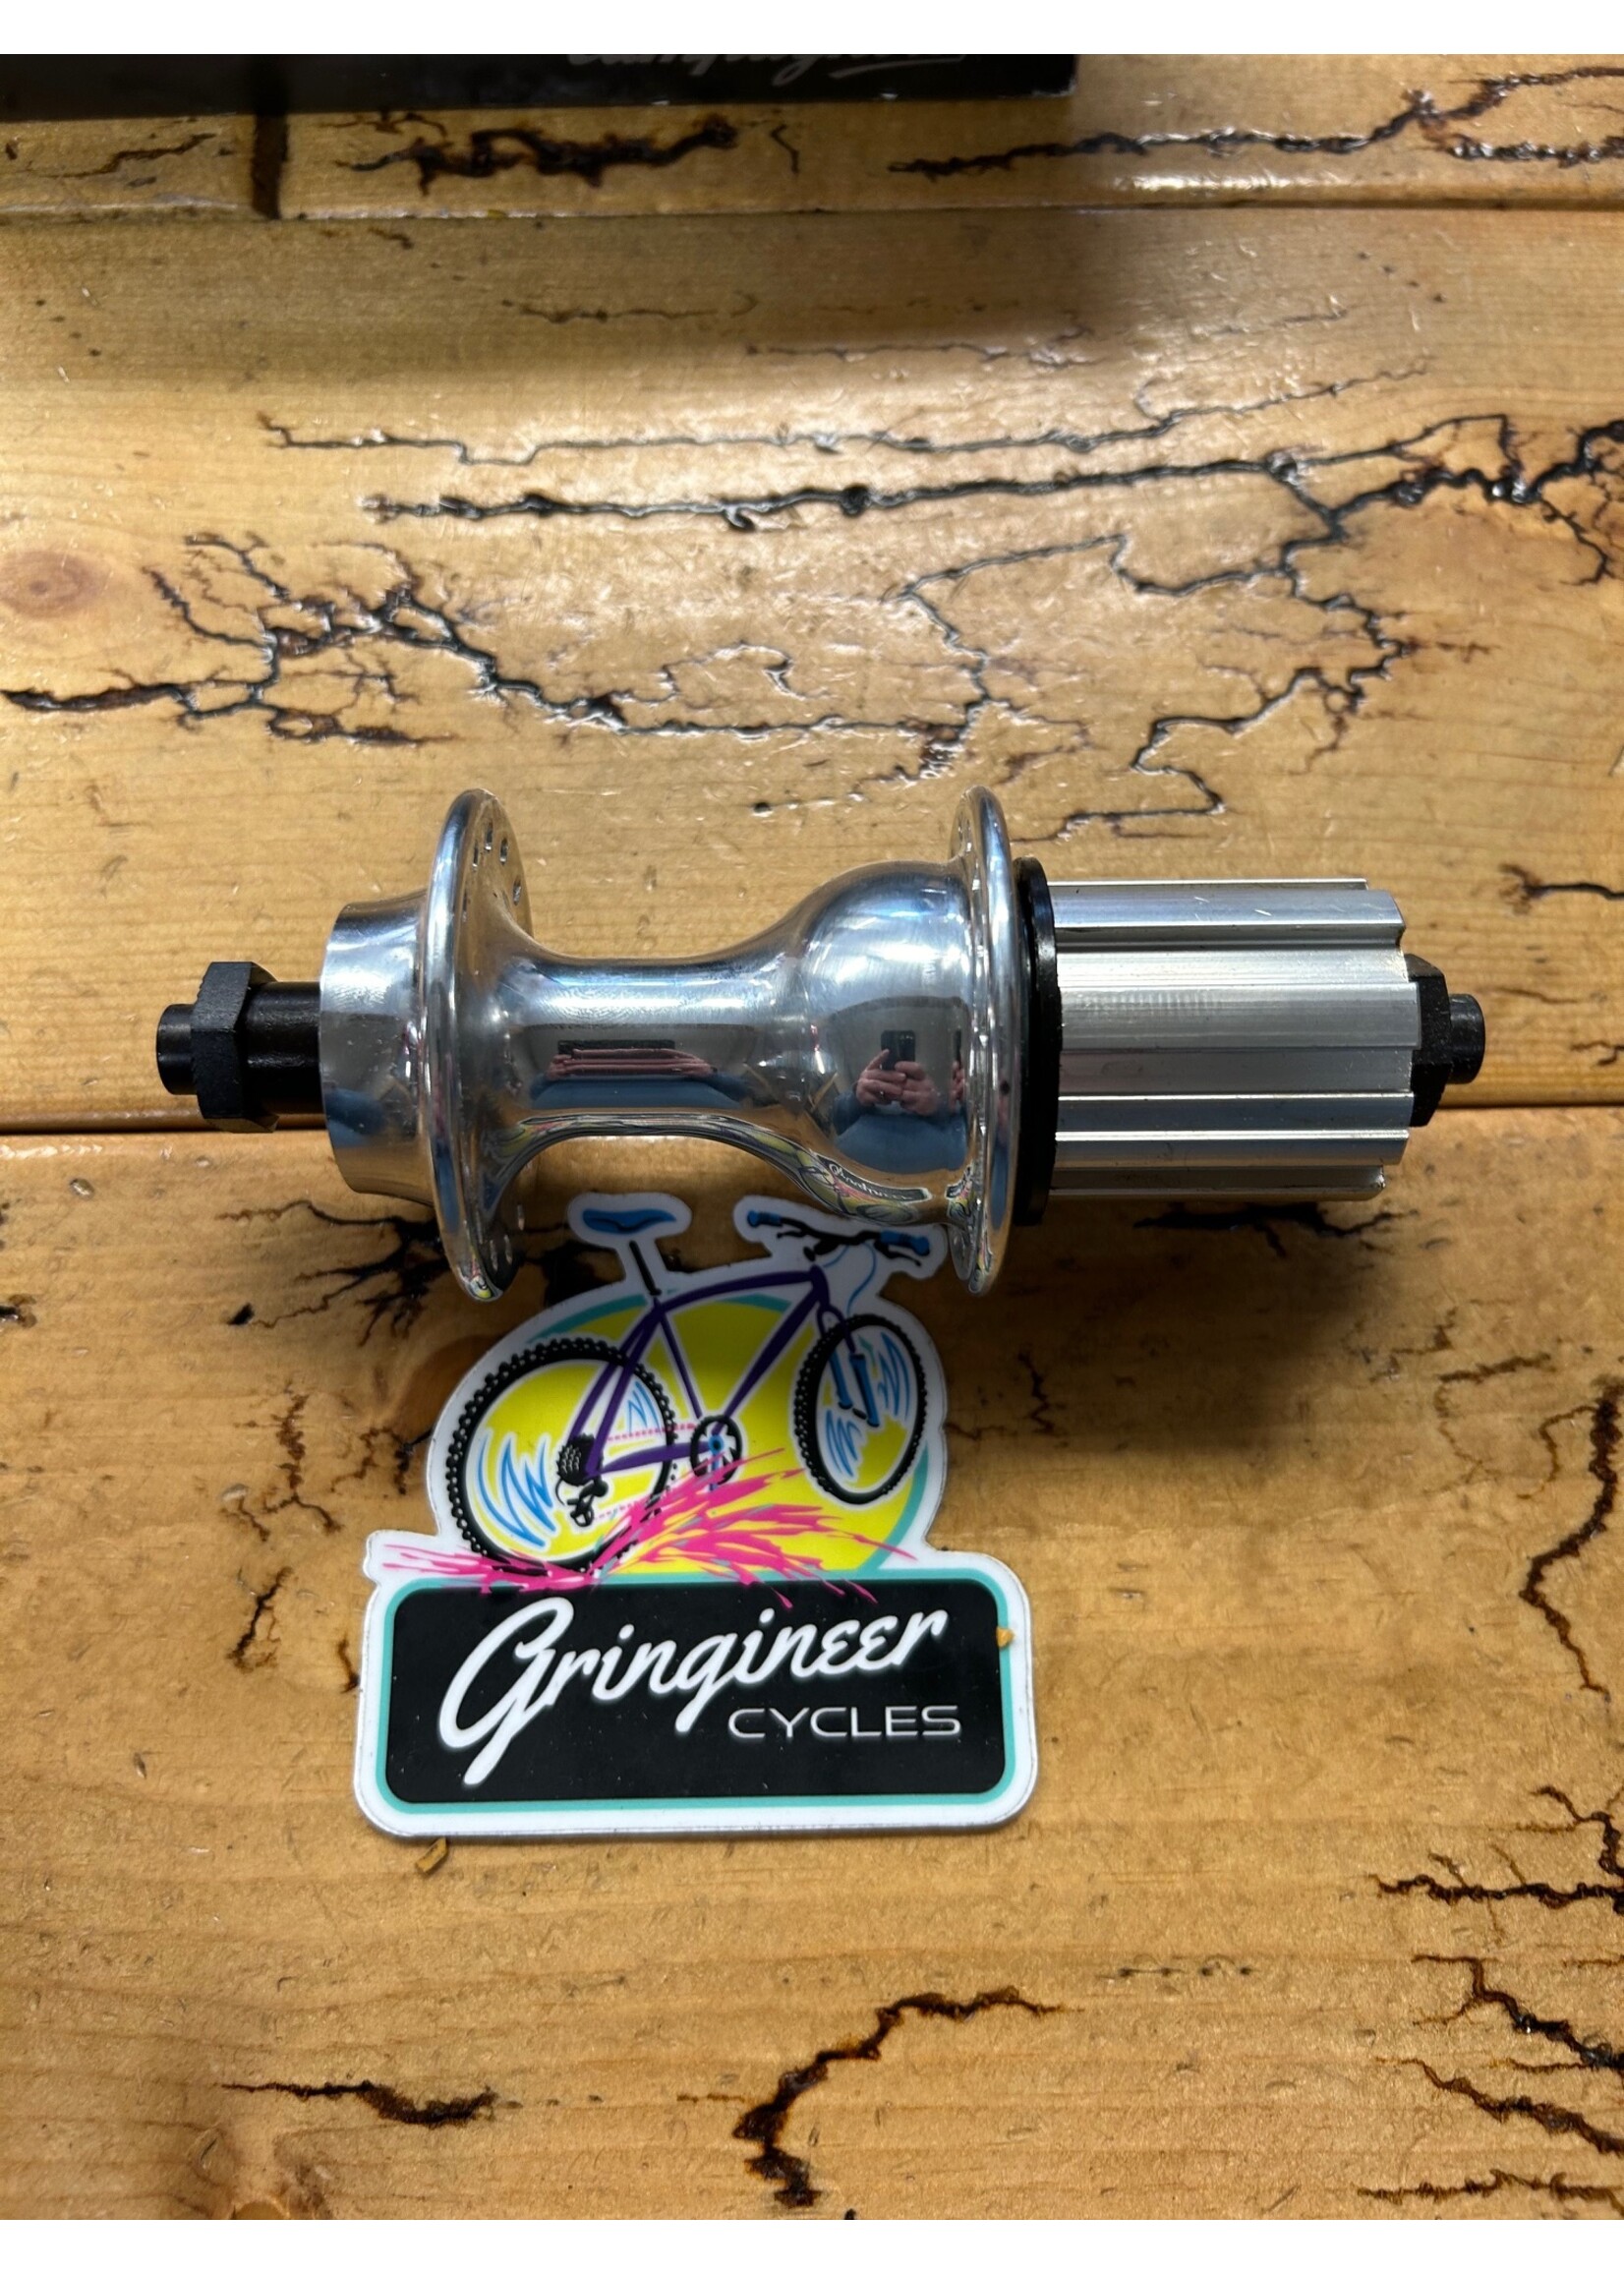 Campagnolo Campagnolo Veloce 9 Speed 32 Hole Rear Hub NOS